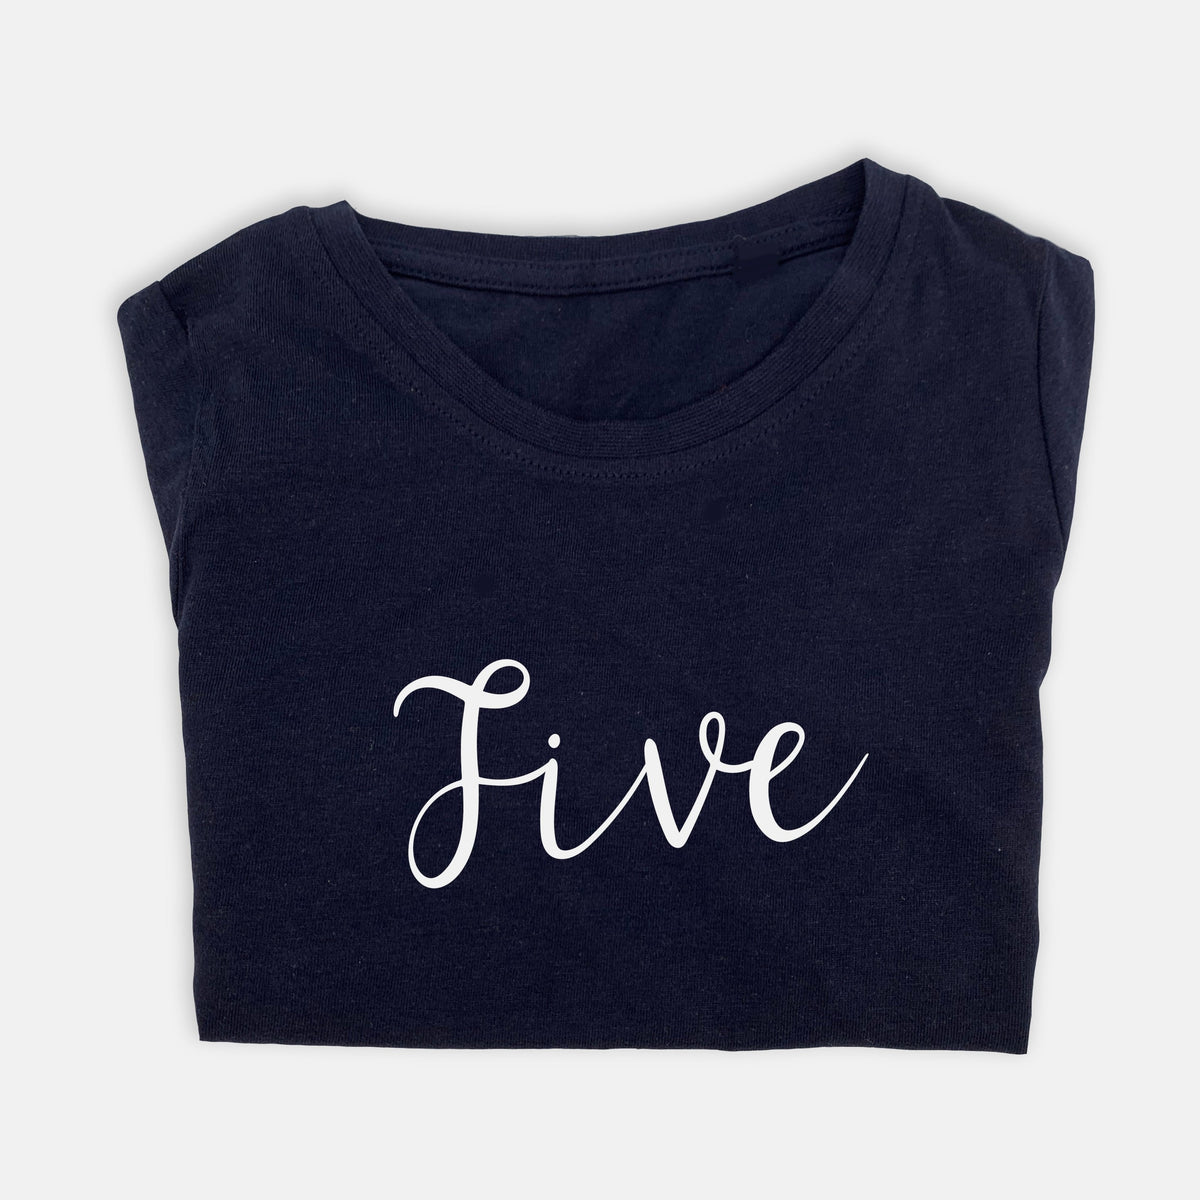 Milestone Gift Set - The Perfect Birthday Gift Set with T-shirt - FIVE year old